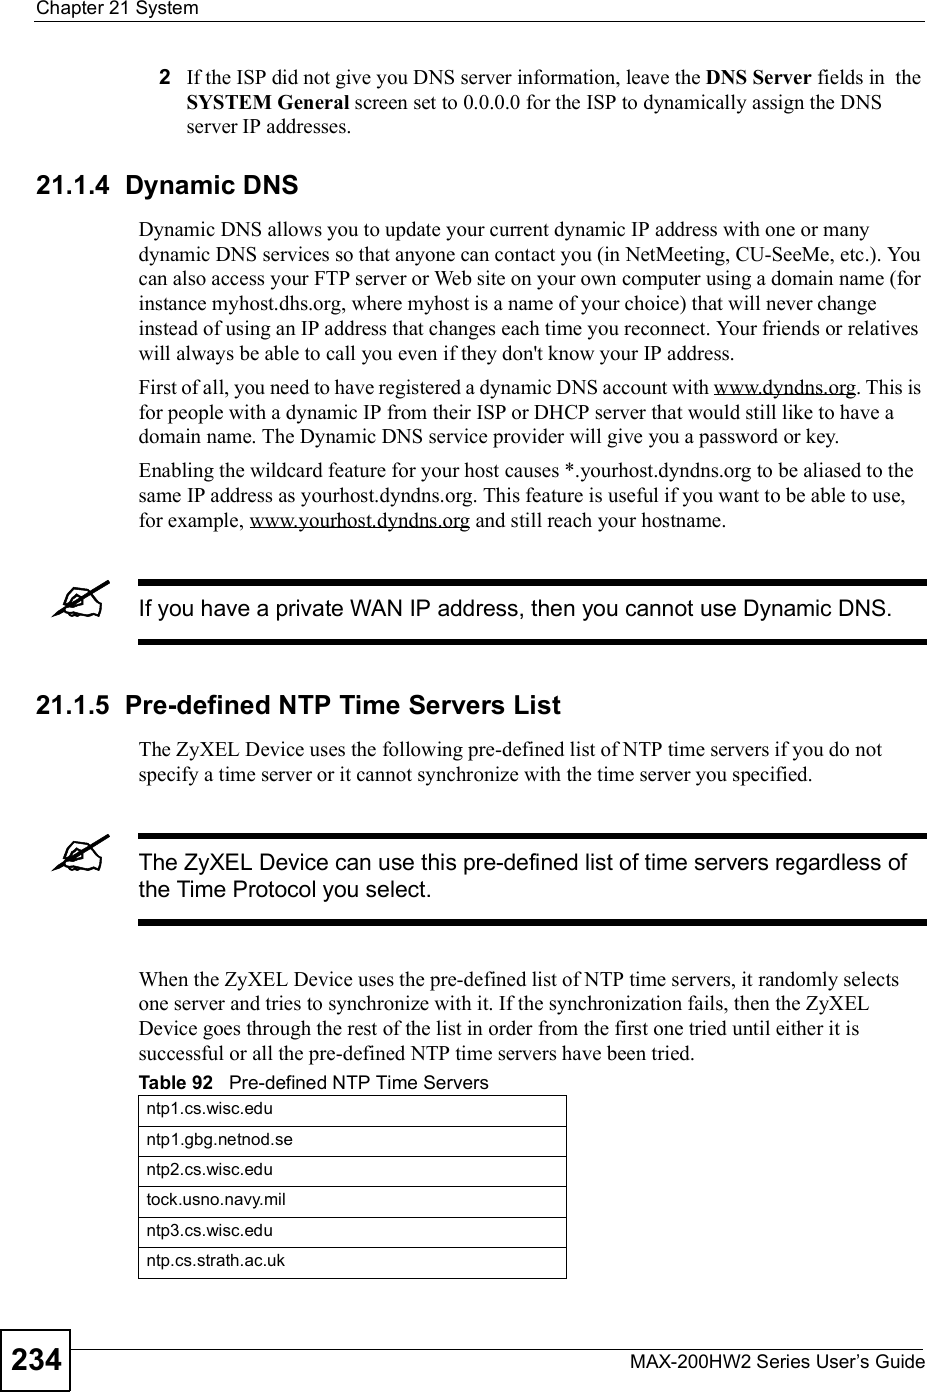 Chapter 21SystemMAX-200HW2 Series User s Guide2342If the ISP did not give you DNS server information, leave the DNS Server fields in  the SYSTEM General screen set to 0.0.0.0 for the ISP to dynamically assign the DNS server IP addresses.21.1.4  Dynamic DNSDynamic DNS allows you to update your current dynamic IP address with one or many dynamic DNS services so that anyone can contact you (in NetMeeting, CU-SeeMe, etc.). You can also access your FTP server or Web site on your own computer using a domain name (for instance myhost.dhs.org, where myhost is a name of your choice) that will never change instead of using an IP address that changes each time you reconnect. Your friends or relatives will always be able to call you even if they don&apos;t know your IP address.First of all, you need to have registered a dynamic DNS account with www.dyndns.org. This is for people with a dynamic IP from their ISP or DHCP server that would still like to have a domain name. The Dynamic DNS service provider will give you a password or key.Enabling the wildcard feature for your host causes *.yourhost.dyndns.org to be aliased to the same IP address as yourhost.dyndns.org. This feature is useful if you want to be able to use, for example, www.yourhost.dyndns.org and still reach your hostname.If you have a private WAN IP address, then you cannot use Dynamic DNS.21.1.5  Pre-defined NTP Time Servers ListThe ZyXEL Device uses the following pre-defined list of NTP time servers if you do not specify a time server or it cannot synchronize with the time server you specified.The ZyXEL Device can use this pre-defined list of time servers regardless of the Time Protocol you select.When the ZyXEL Device uses the pre-defined list of NTP time servers, it randomly selects one server and tries to synchronize with it. If the synchronization fails, then the ZyXEL Device goes through the rest of the list in order from the first one tried until either it is successful or all the pre-defined NTP time servers have been tried.Table 92   Pre-defined NTP Time Serversntp1.cs.wisc.eduntp1.gbg.netnod.sentp2.cs.wisc.edutock.usno.navy.milntp3.cs.wisc.eduntp.cs.strath.ac.uk